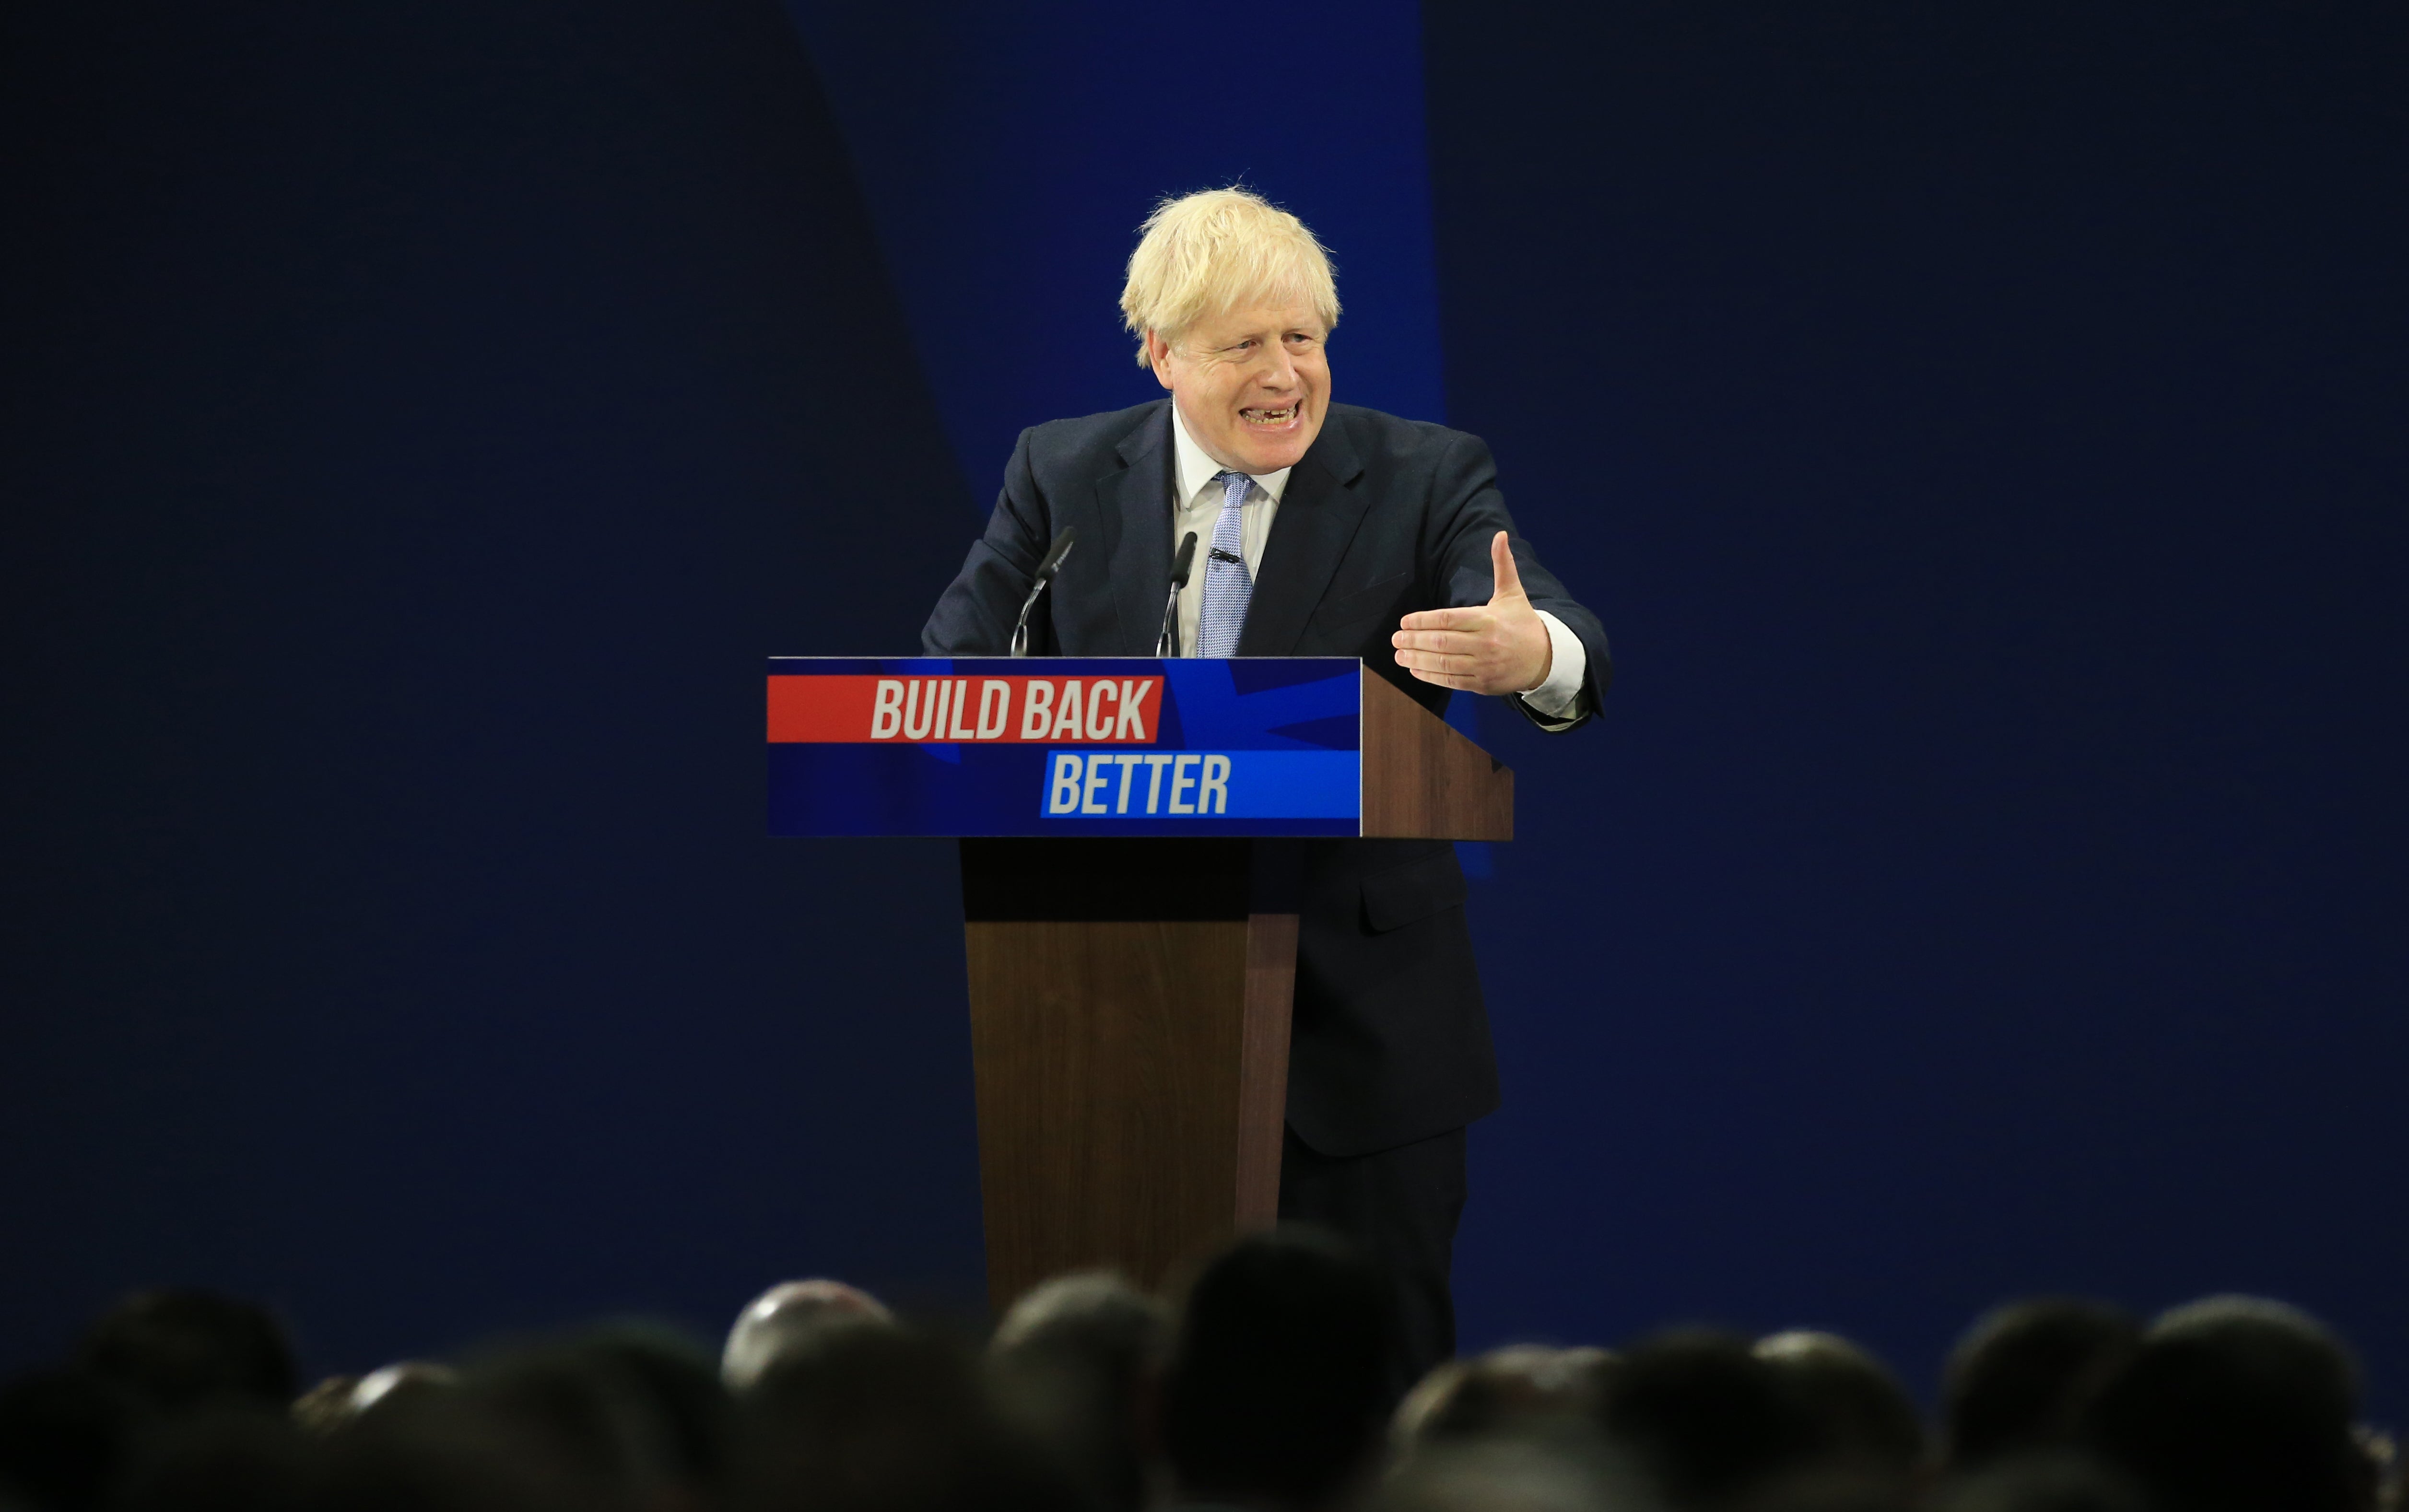 Boris Johnson has suggested that Brexit could trigger a positive adjustment for the UK economy, bringing higher wages and greater prosperity